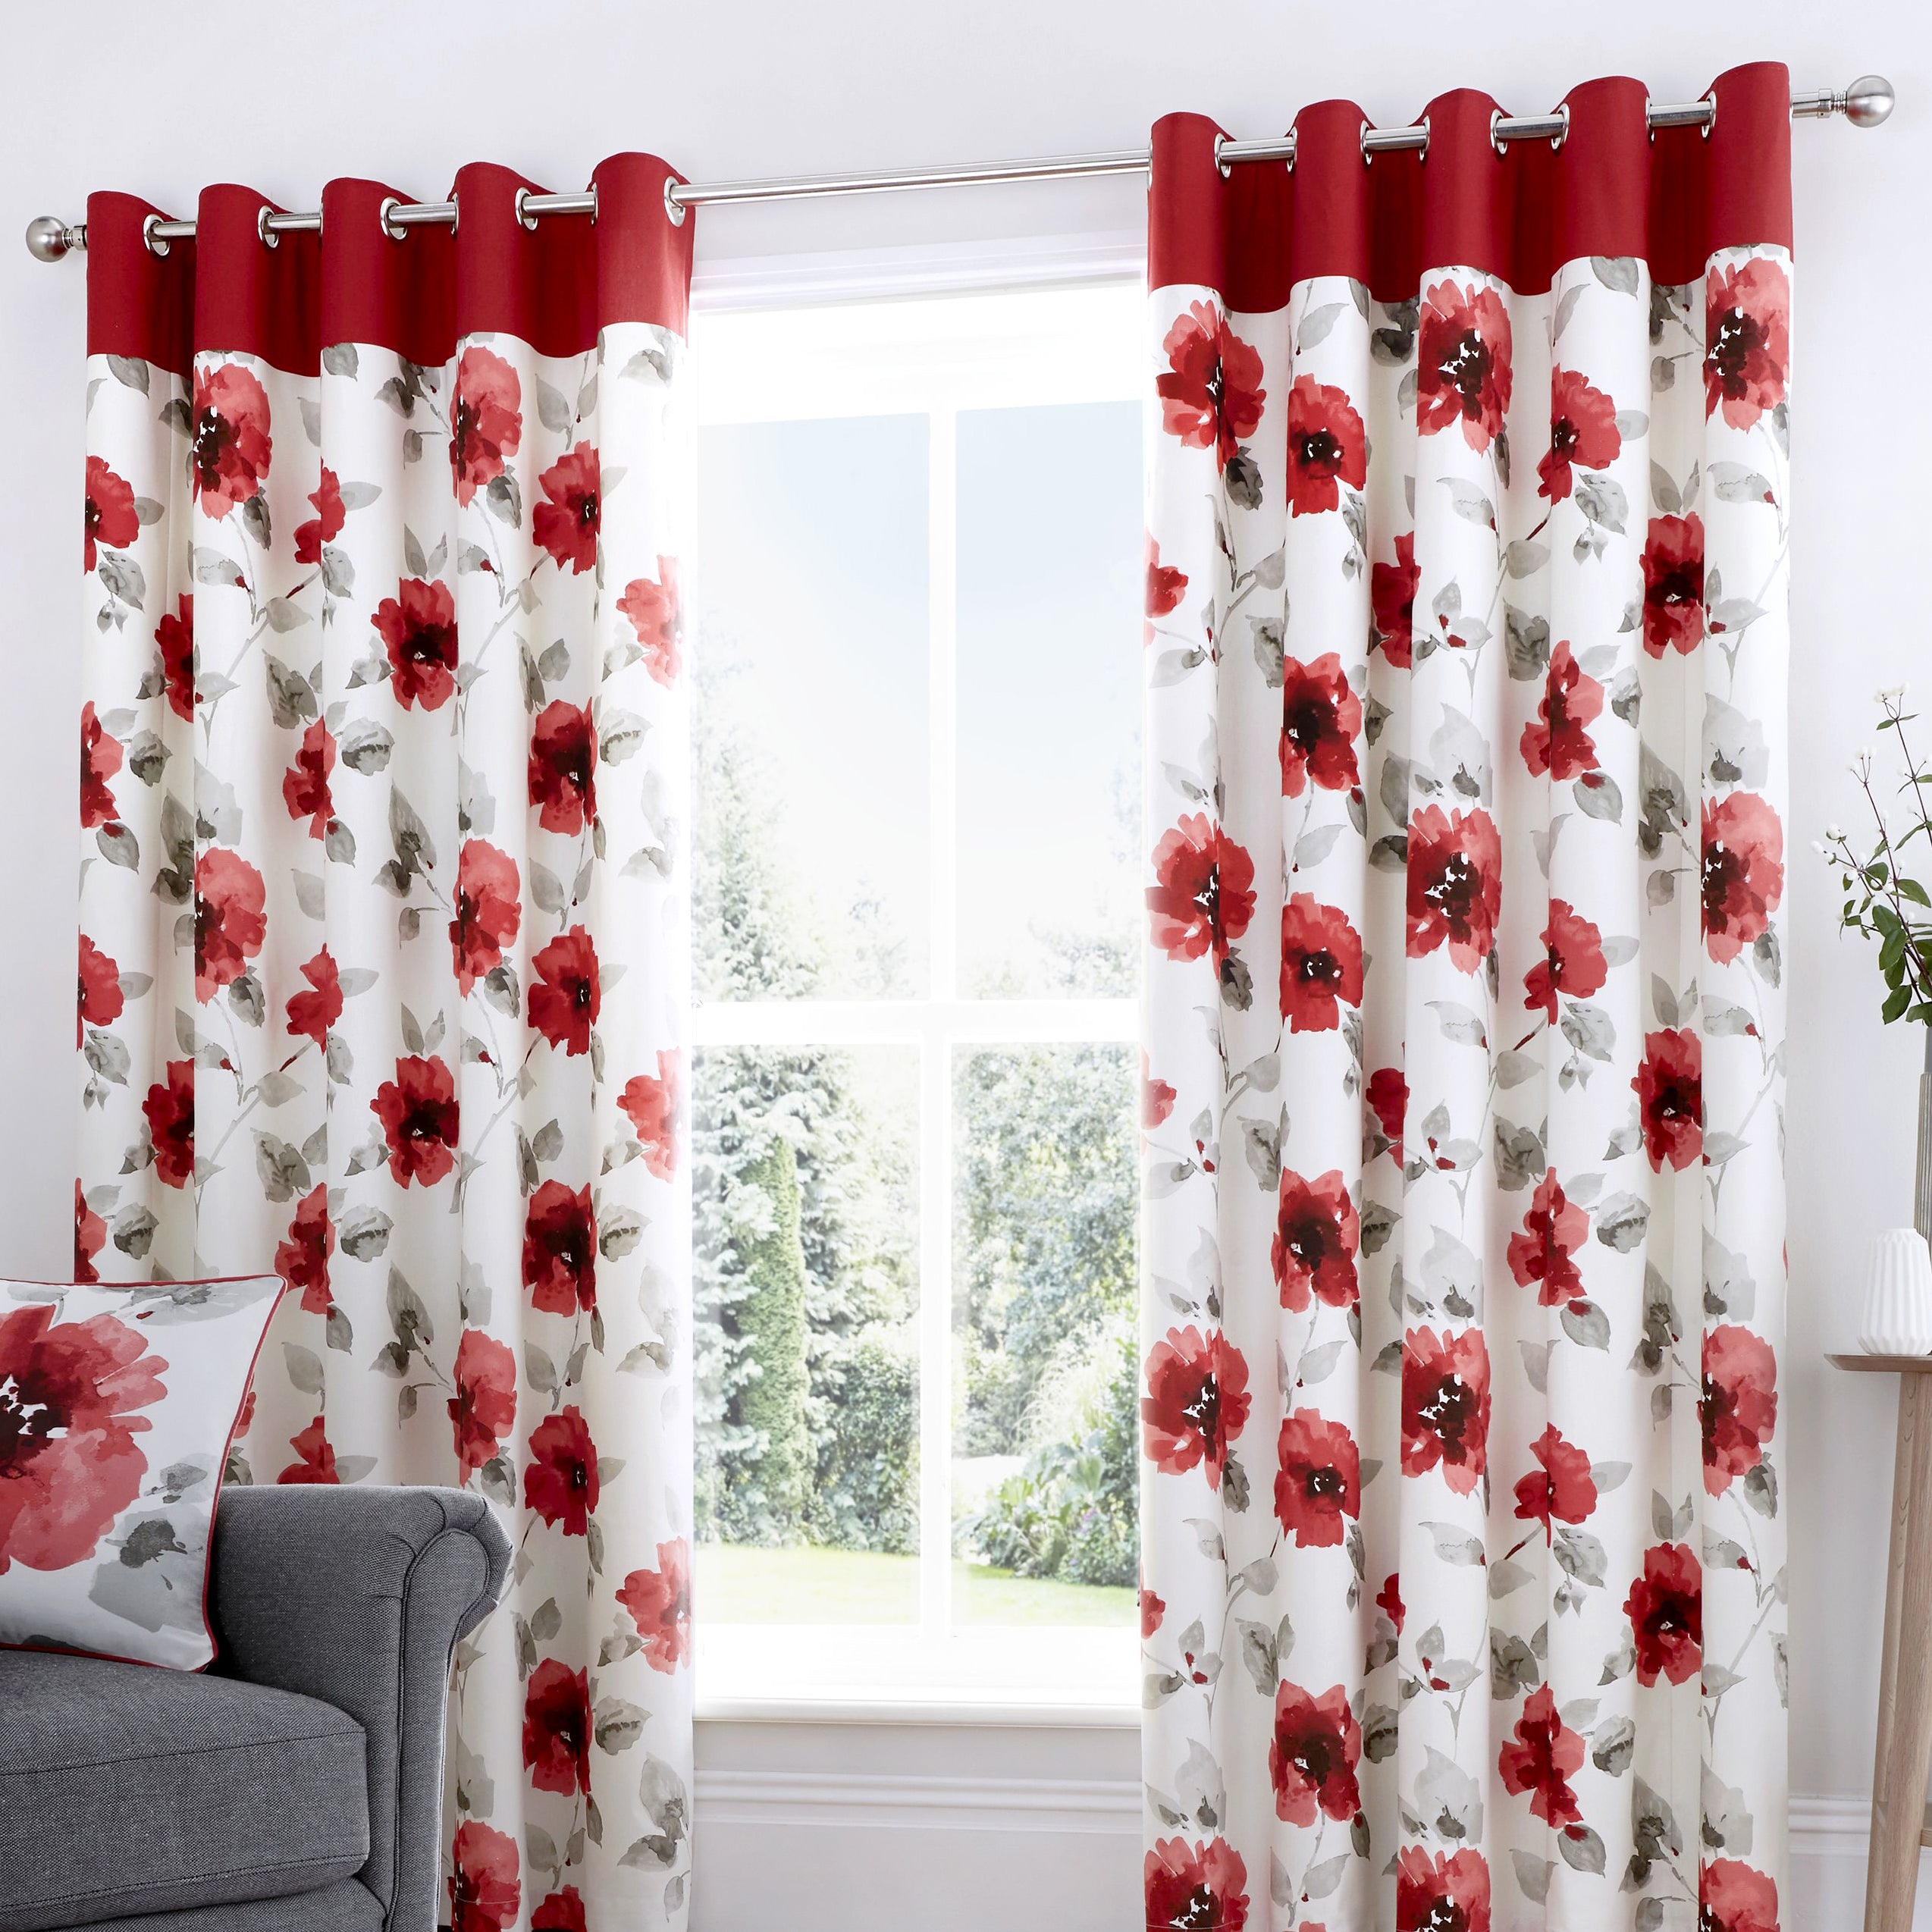 Adriana - 100% Cotton Lined Eyelet Curtains in Red- by Fusion